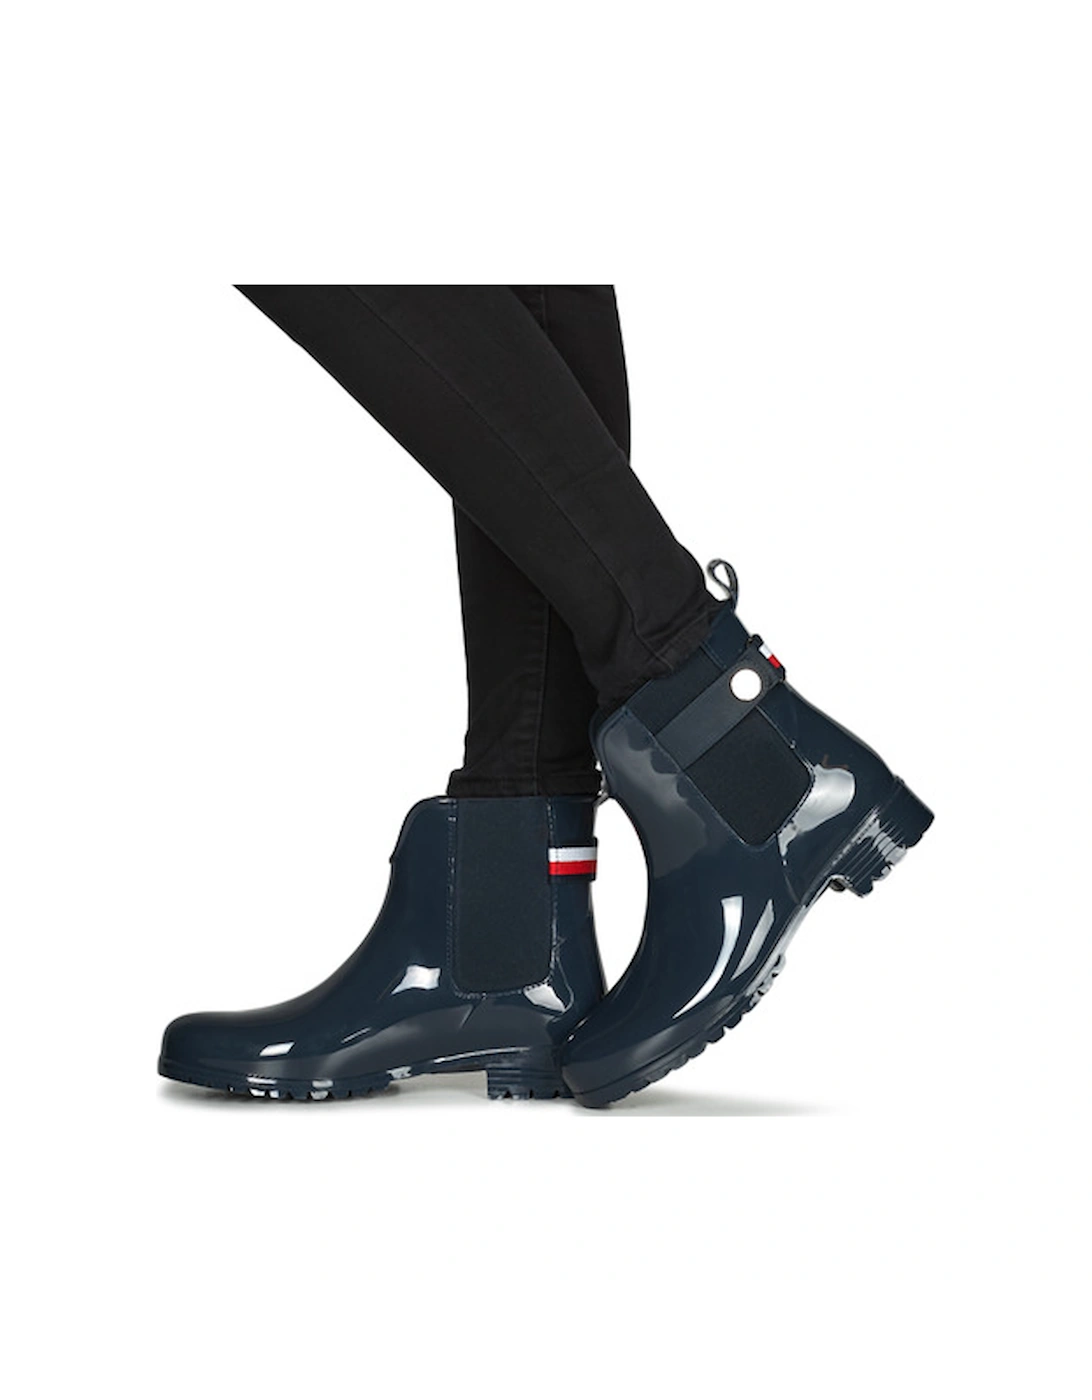 Ankle Rainboot With Metal Detail